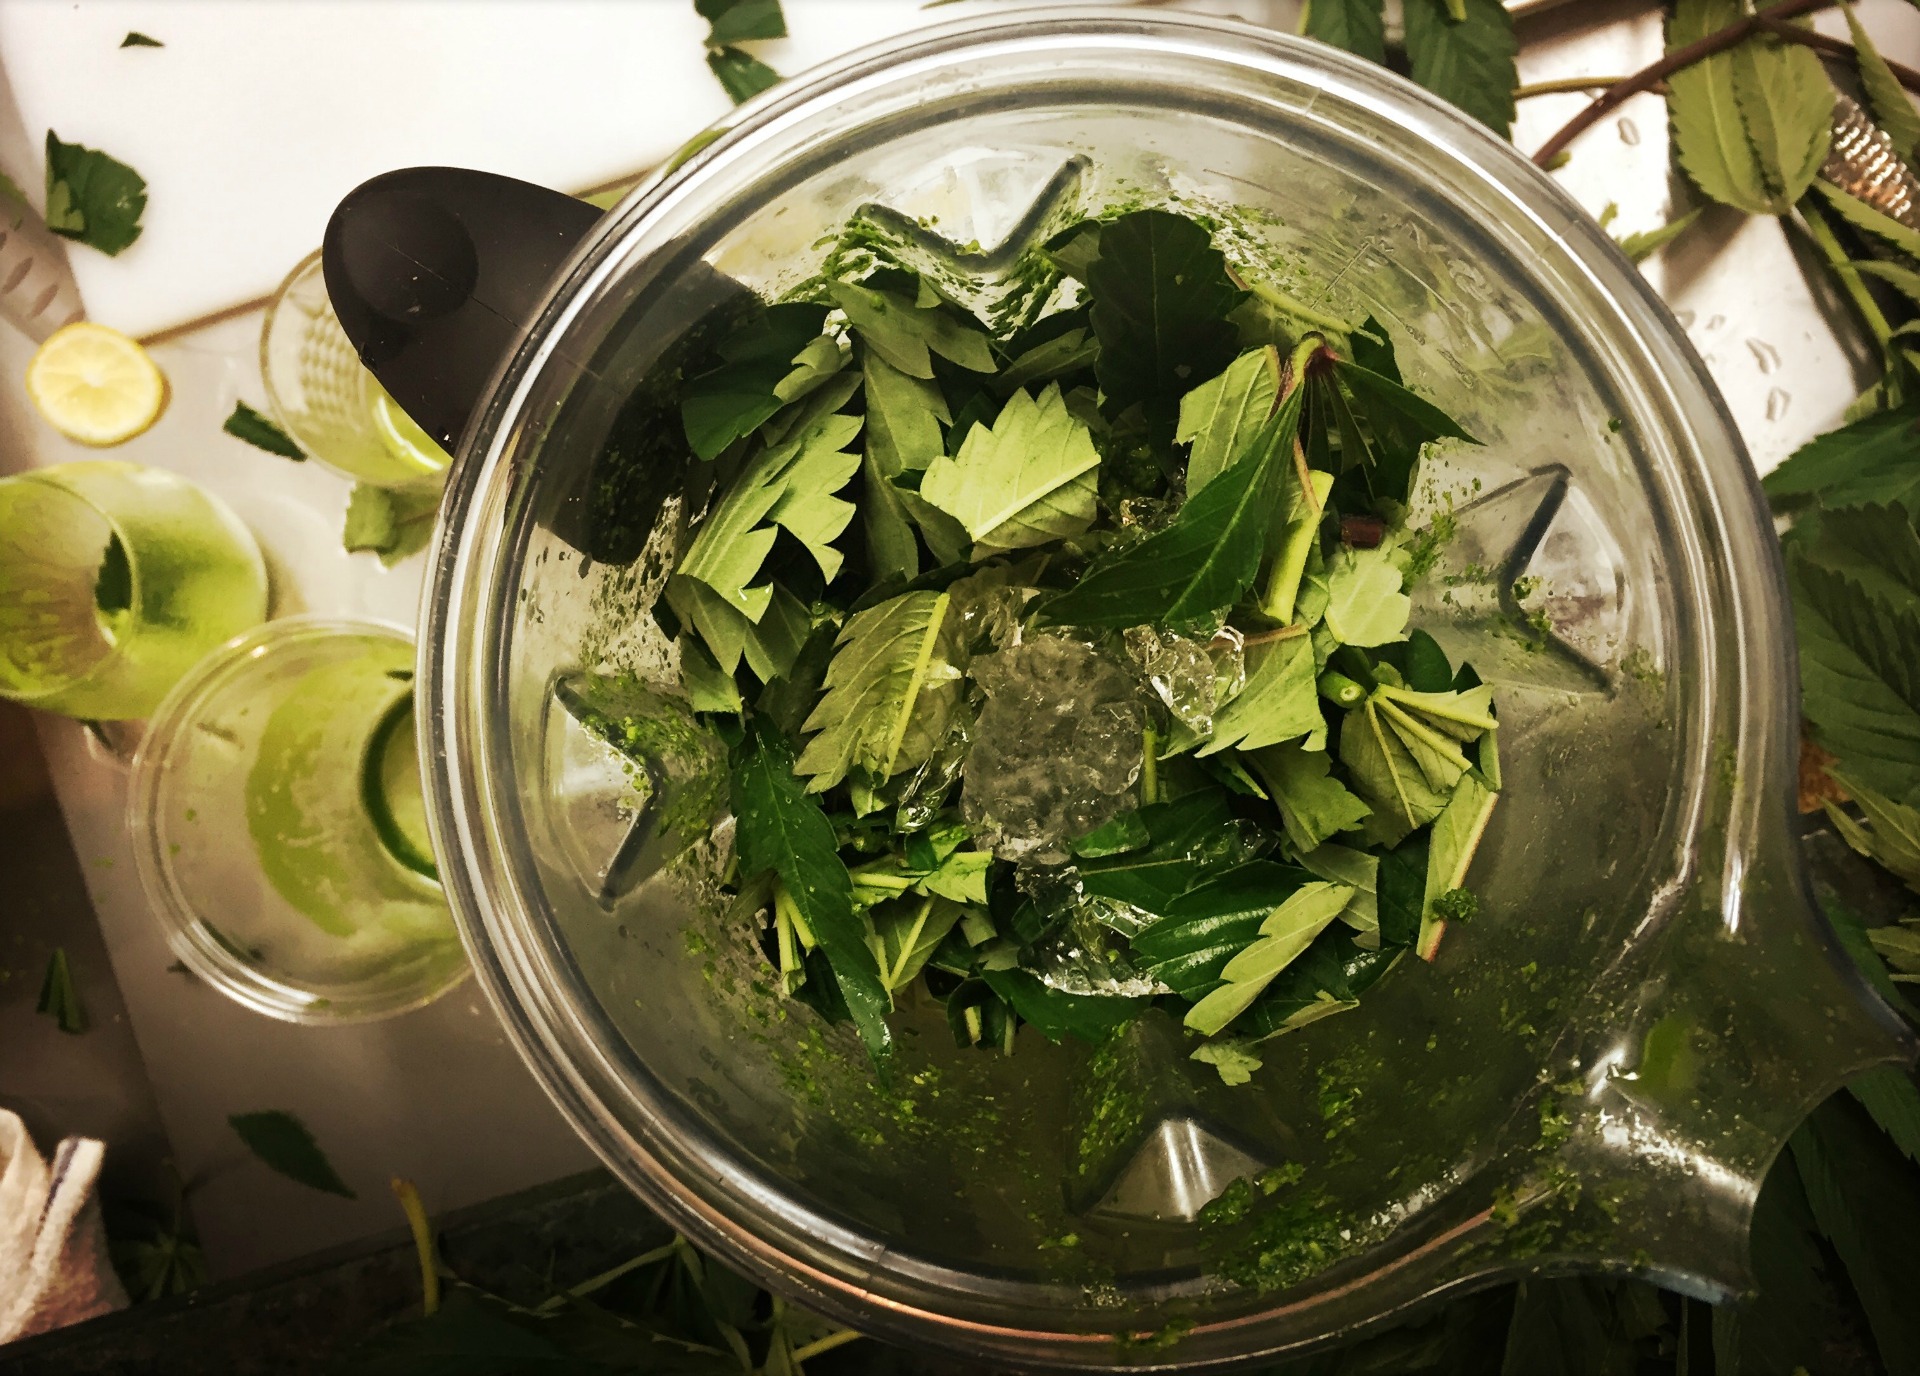 The preparation of one of Payton Curry's cannabis cocktails.